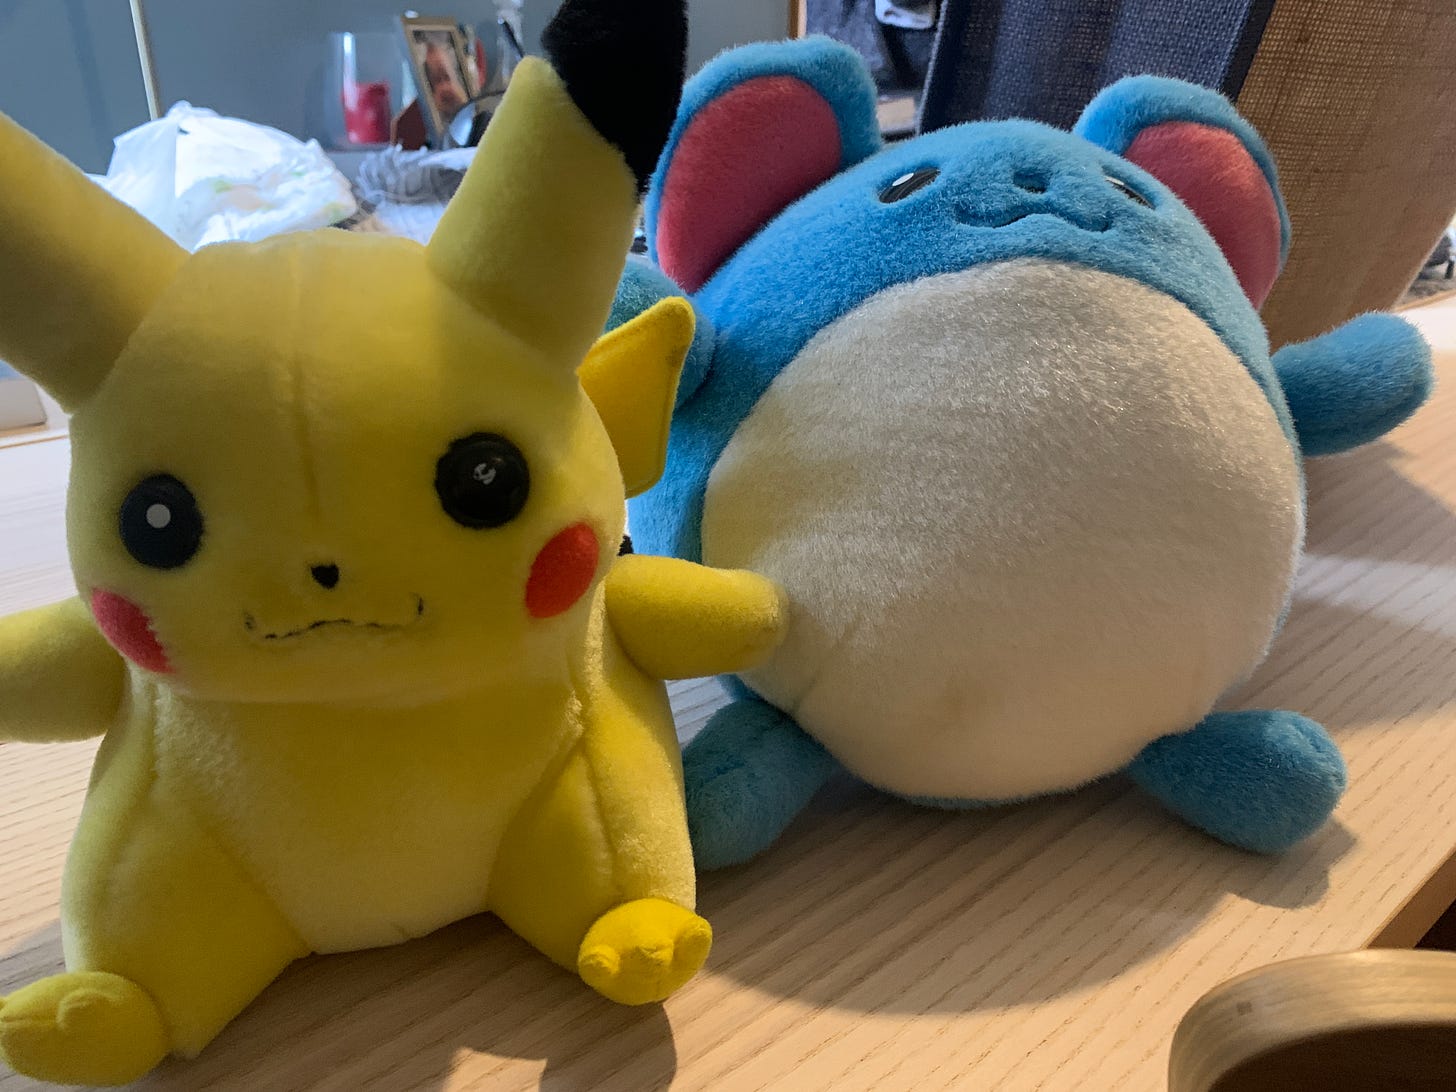 Dom shared a photograph of two Pokémon plush toys he still owns, Pikachu and Marill, which appear to have been well looked after, and are quite vibrant-looking